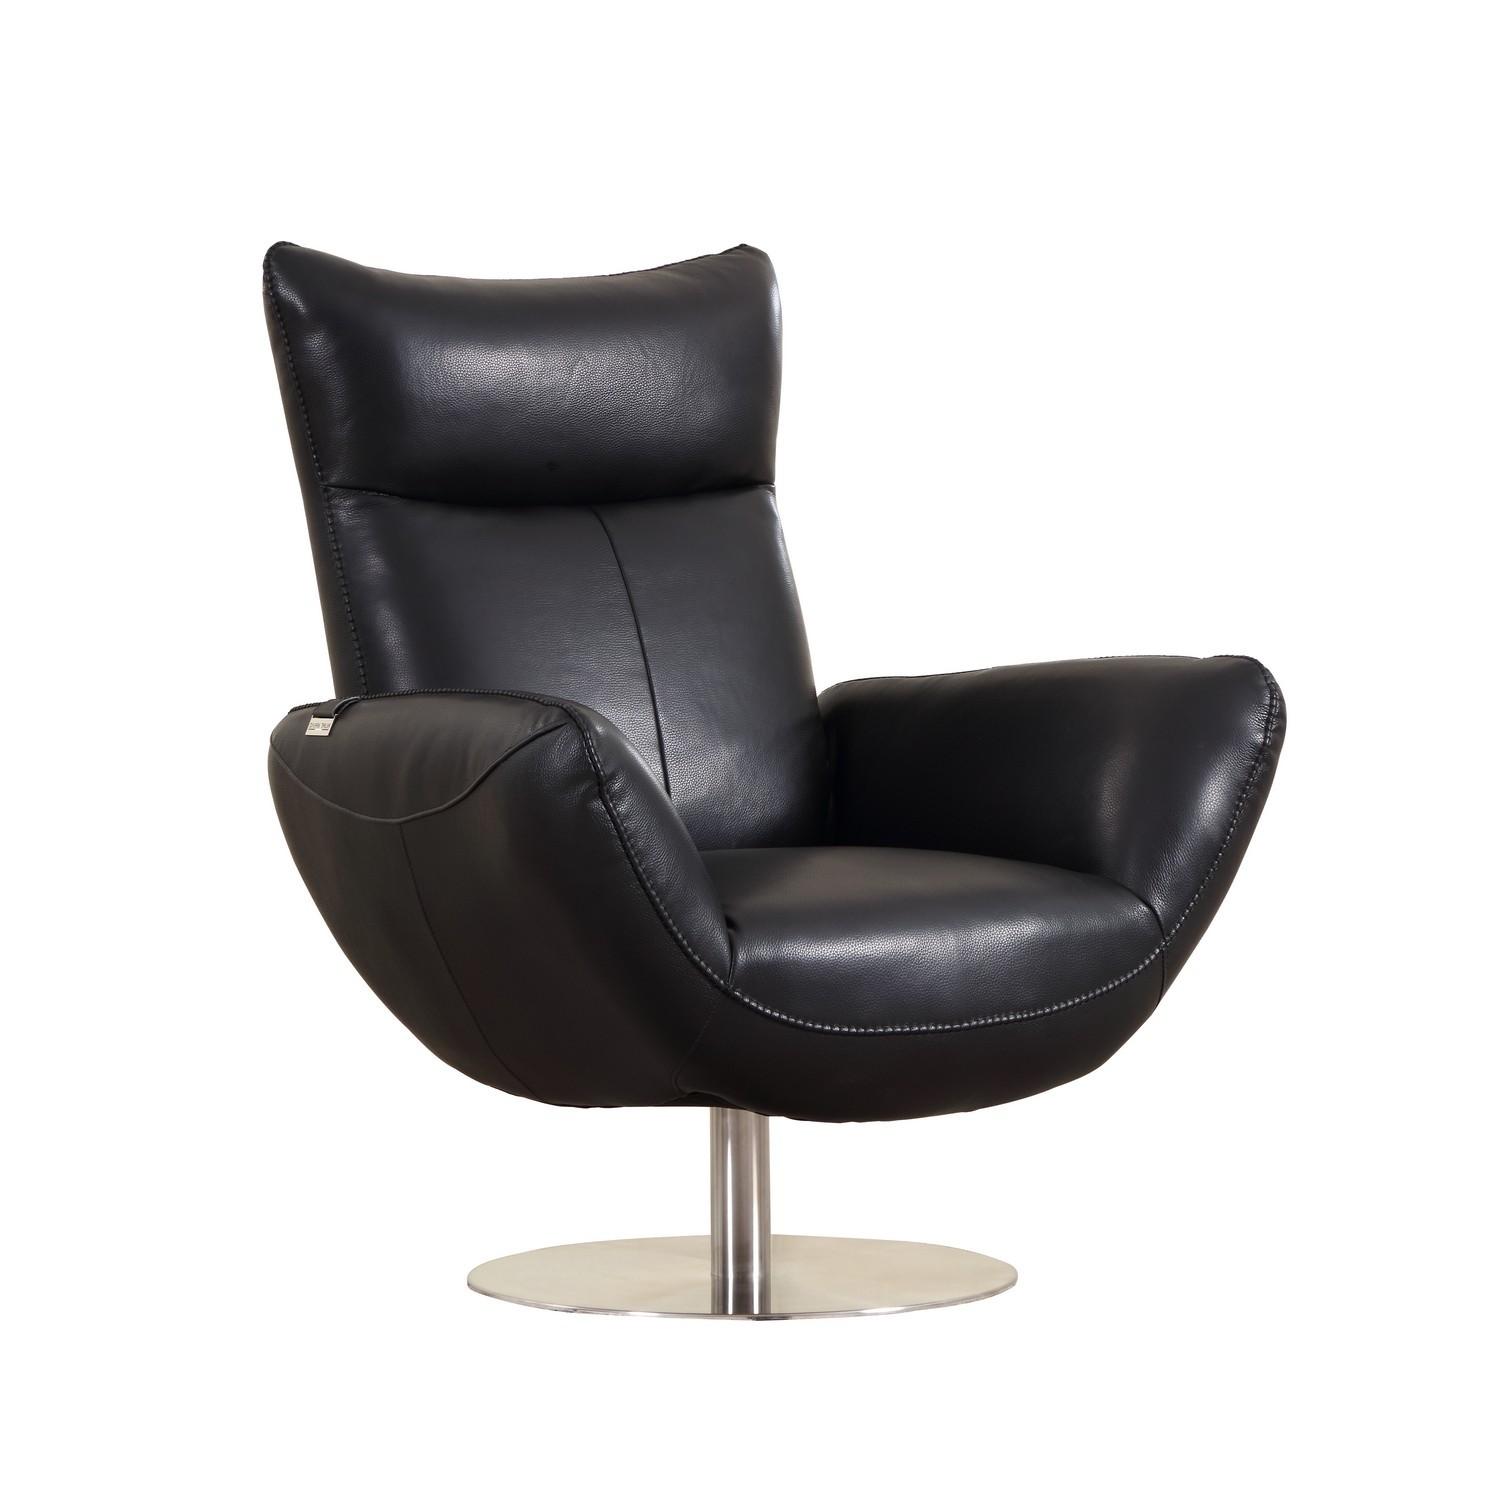 Contemporary Lounge Chair Jesse 624-BLACK in Black Italian Leather